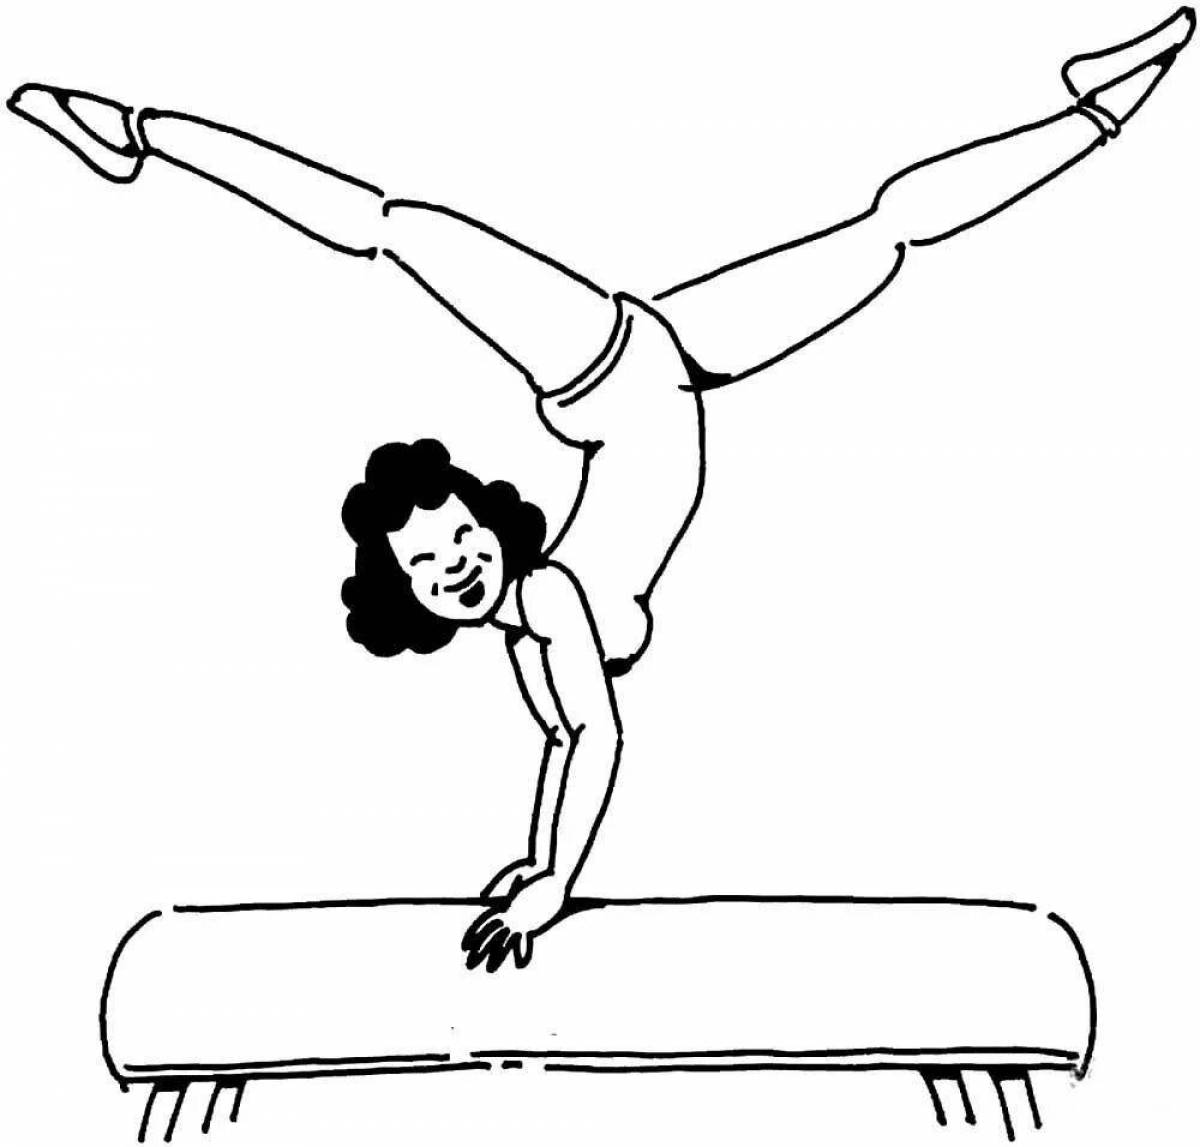 Coloring page exciting acrobatics